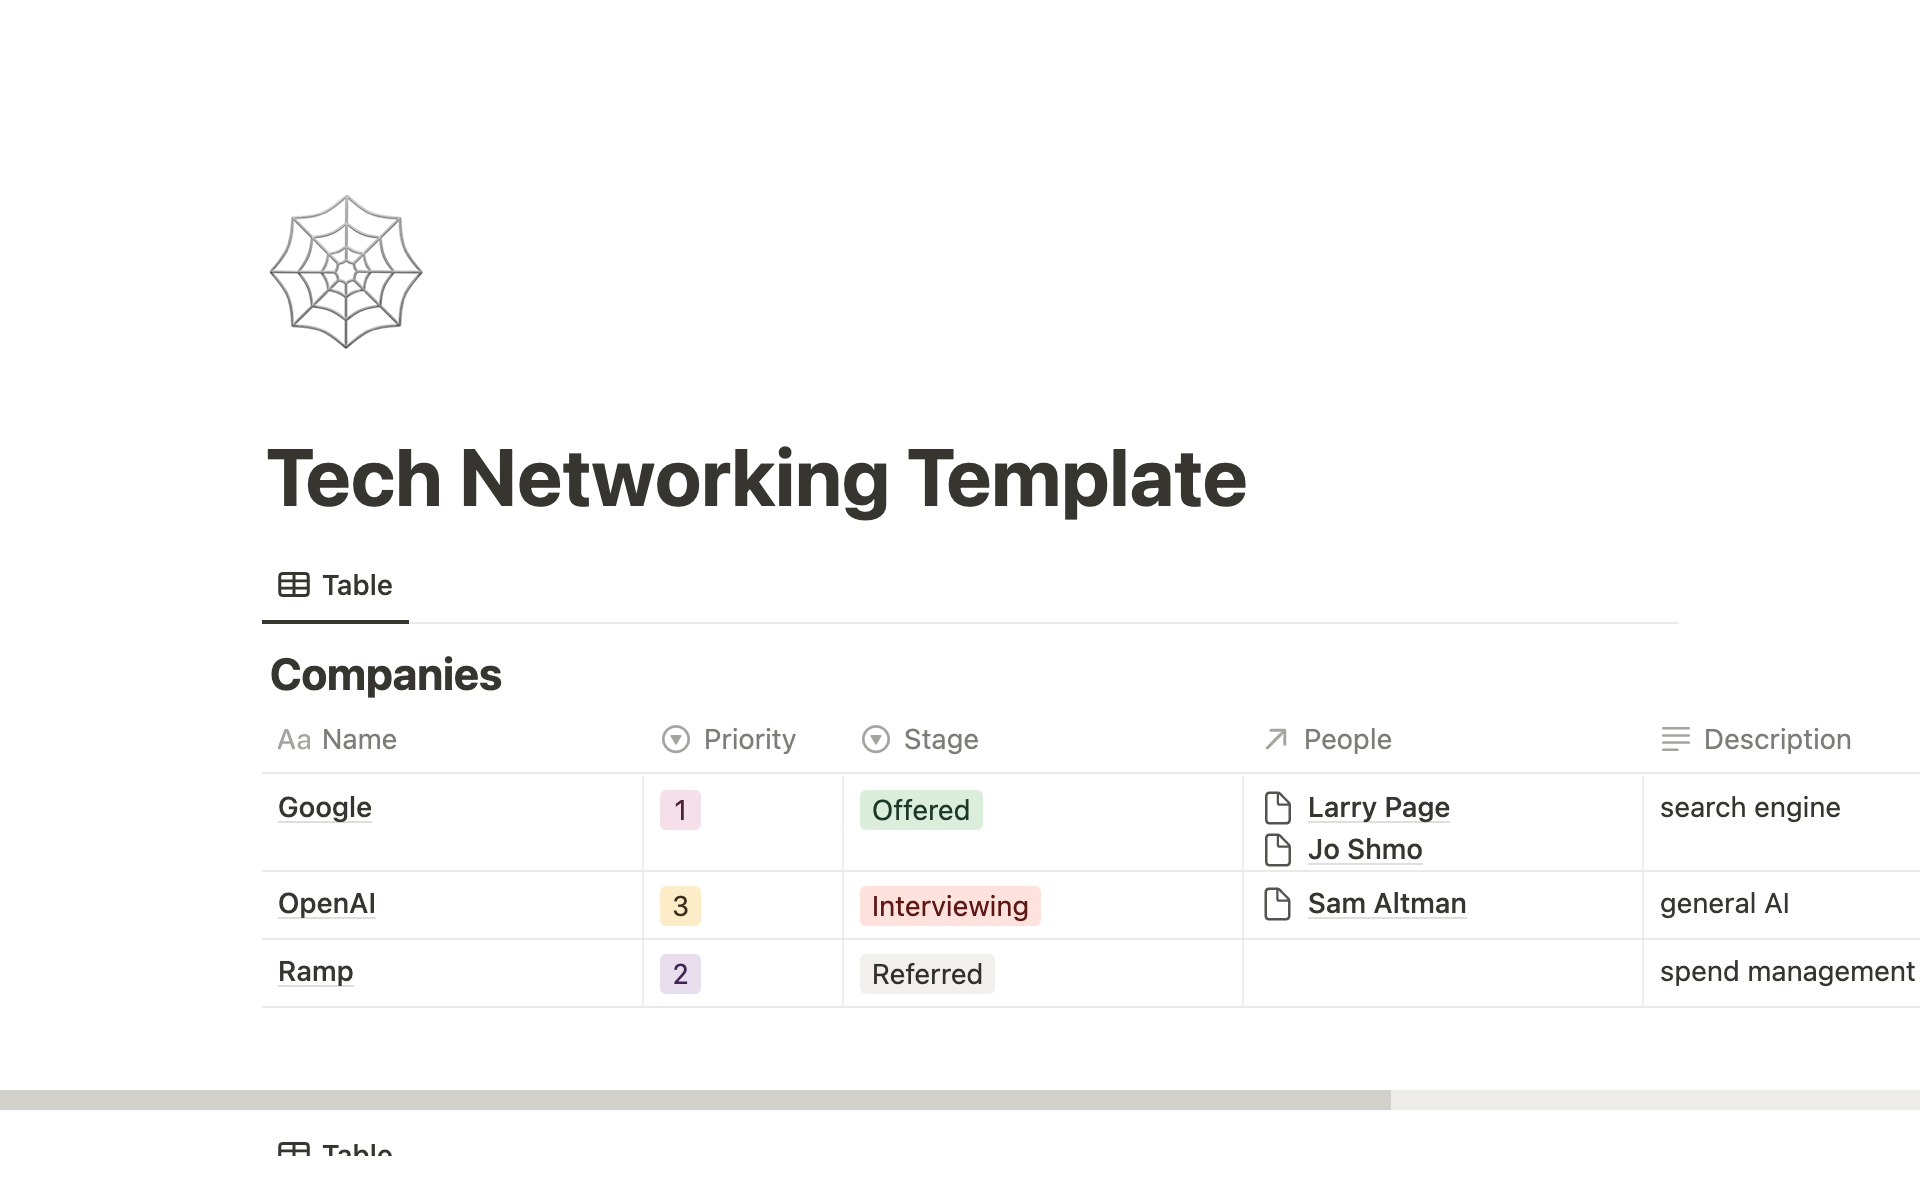 Easily populate and track the relationships between companies, people, and meetings.